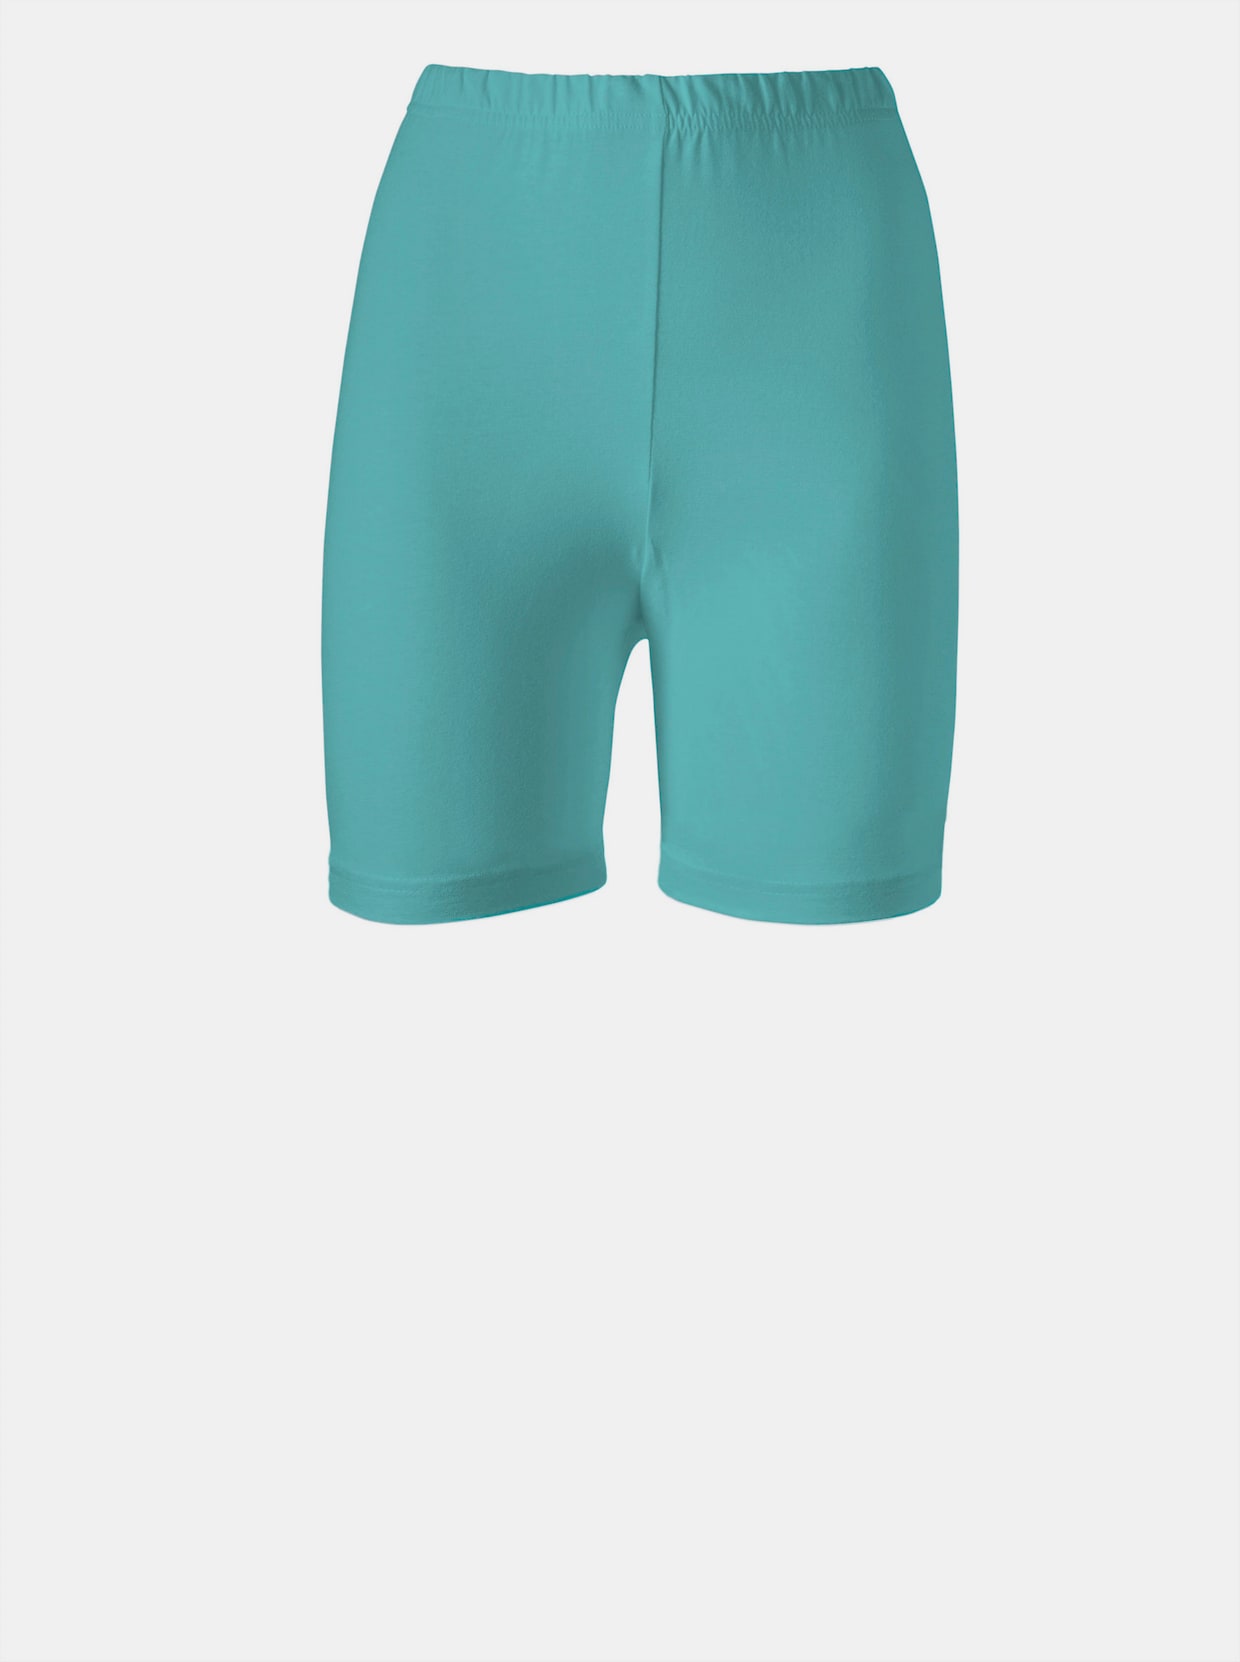 Cycliste - turquoise